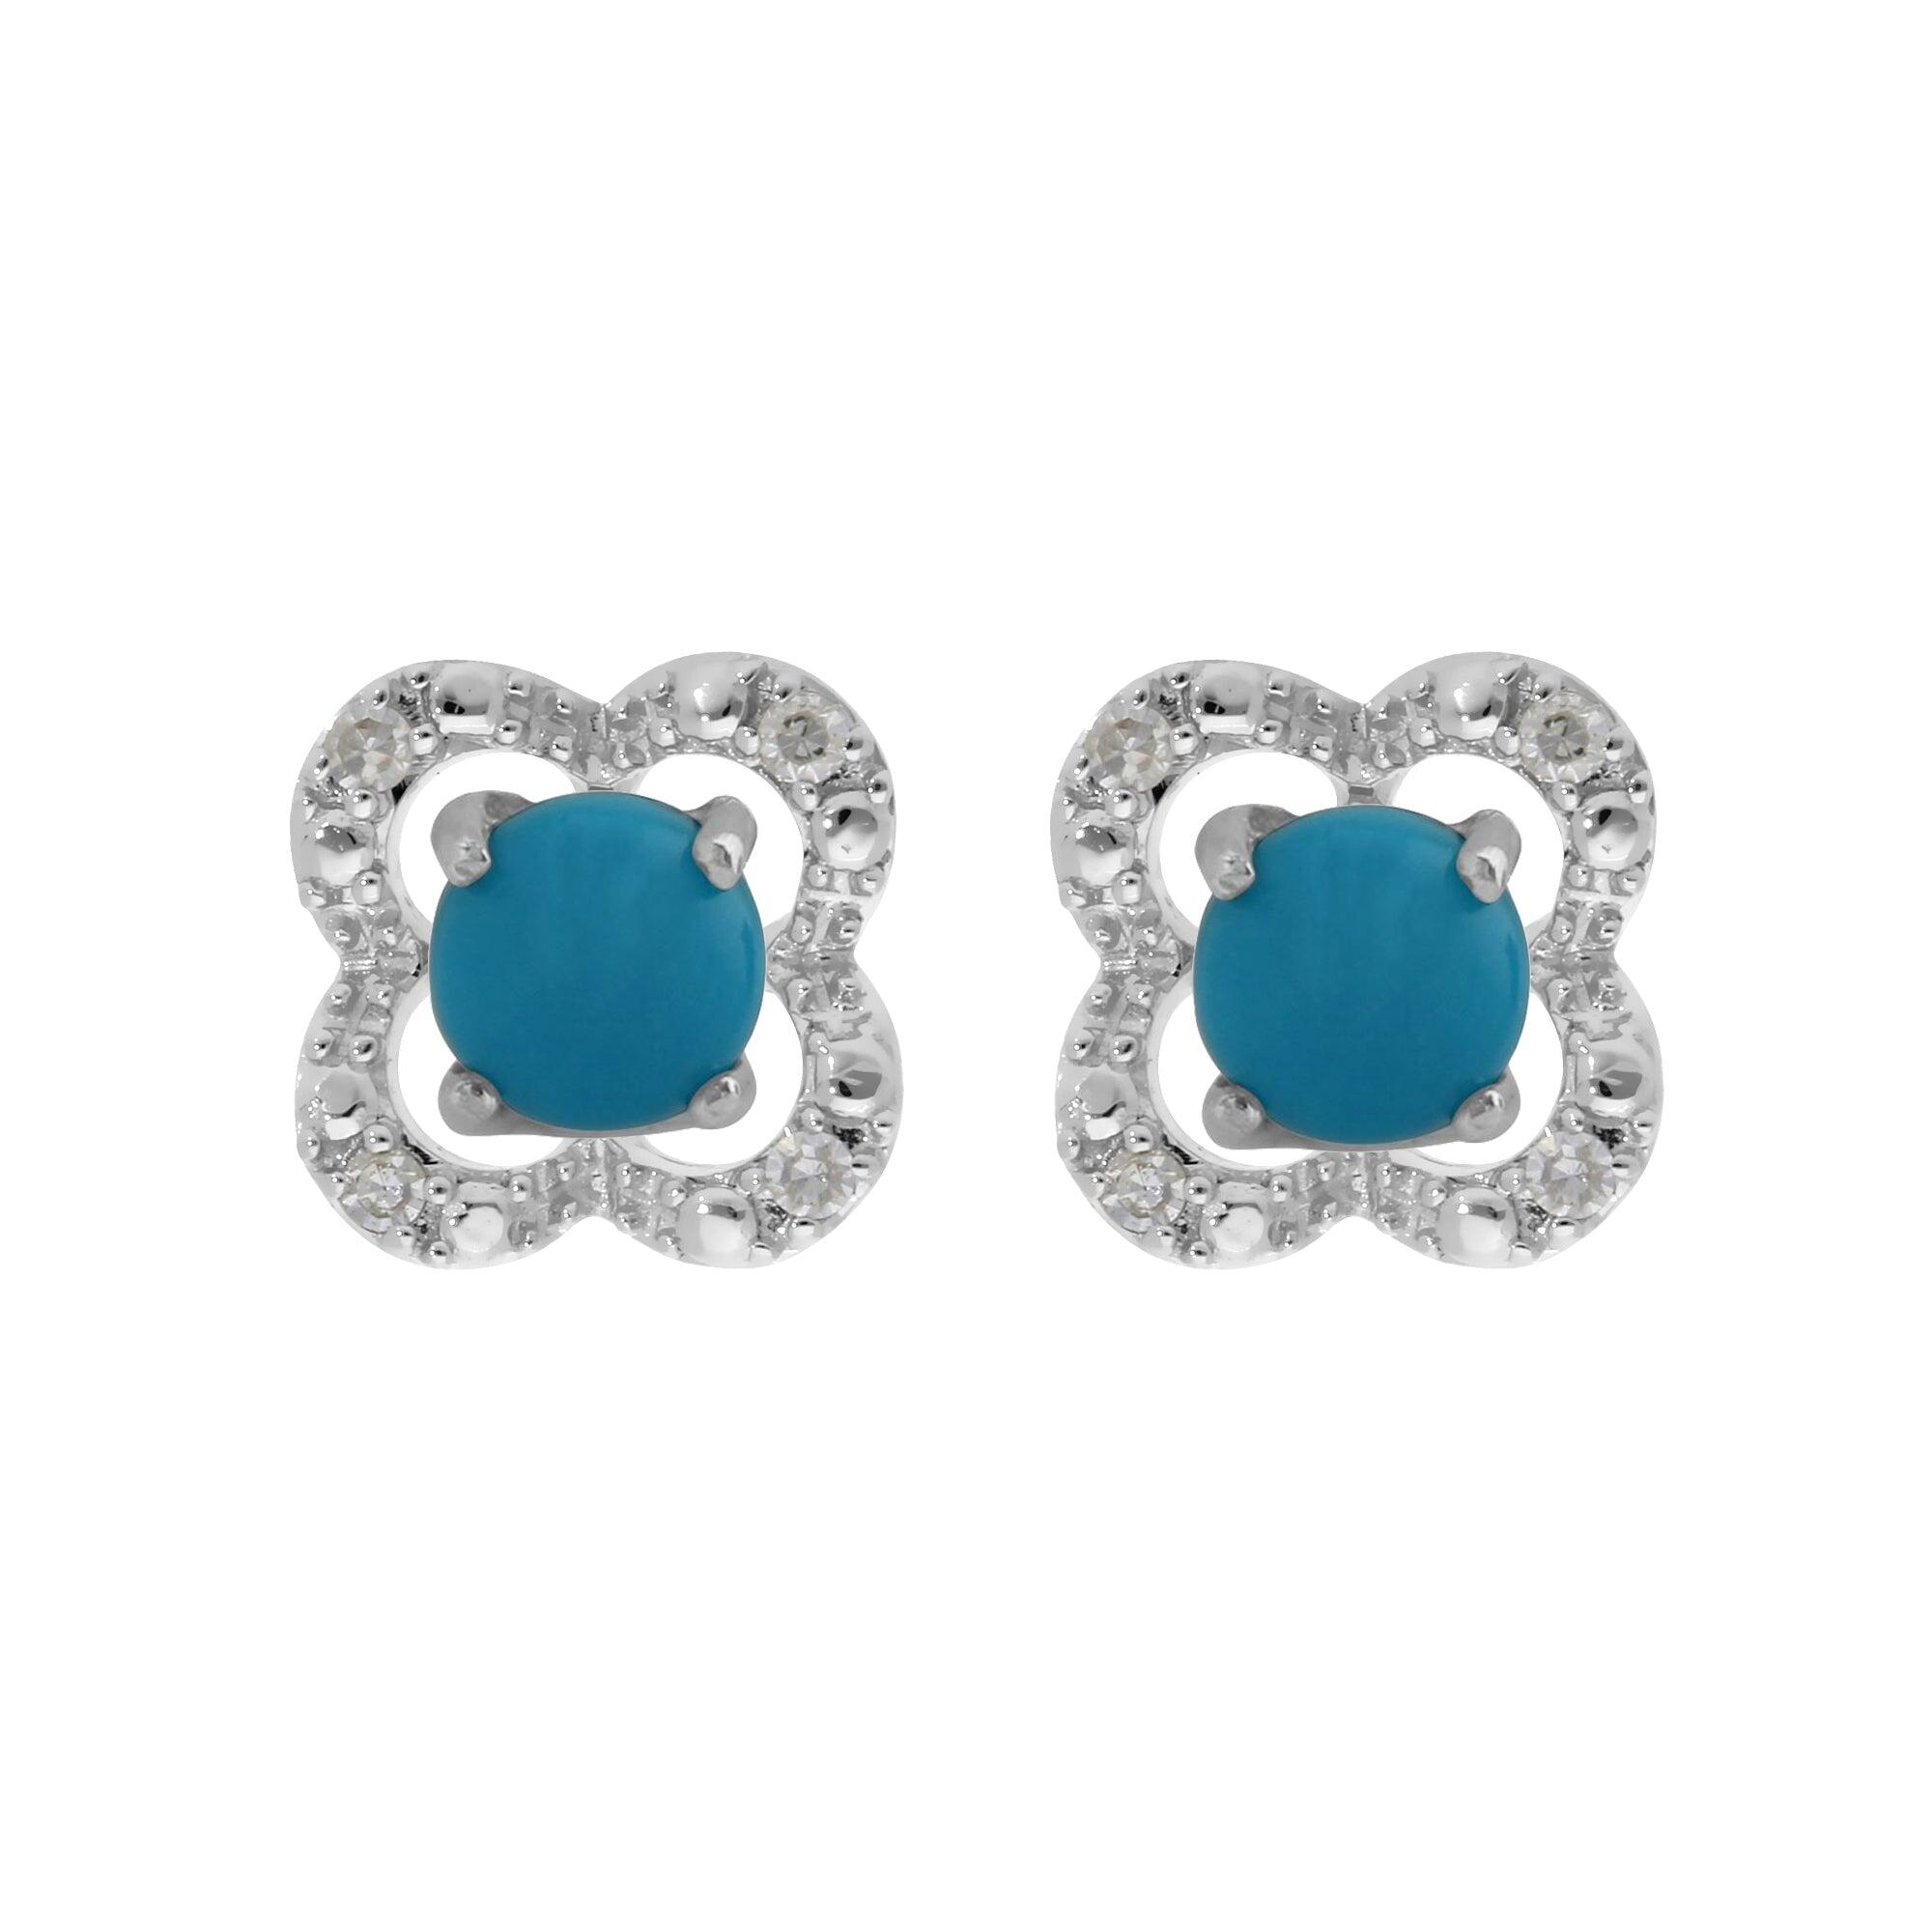 Classic Round Turquoise Stud Earrings with Detachable Diamond Flower Ear Jacket in 9ct White Gold